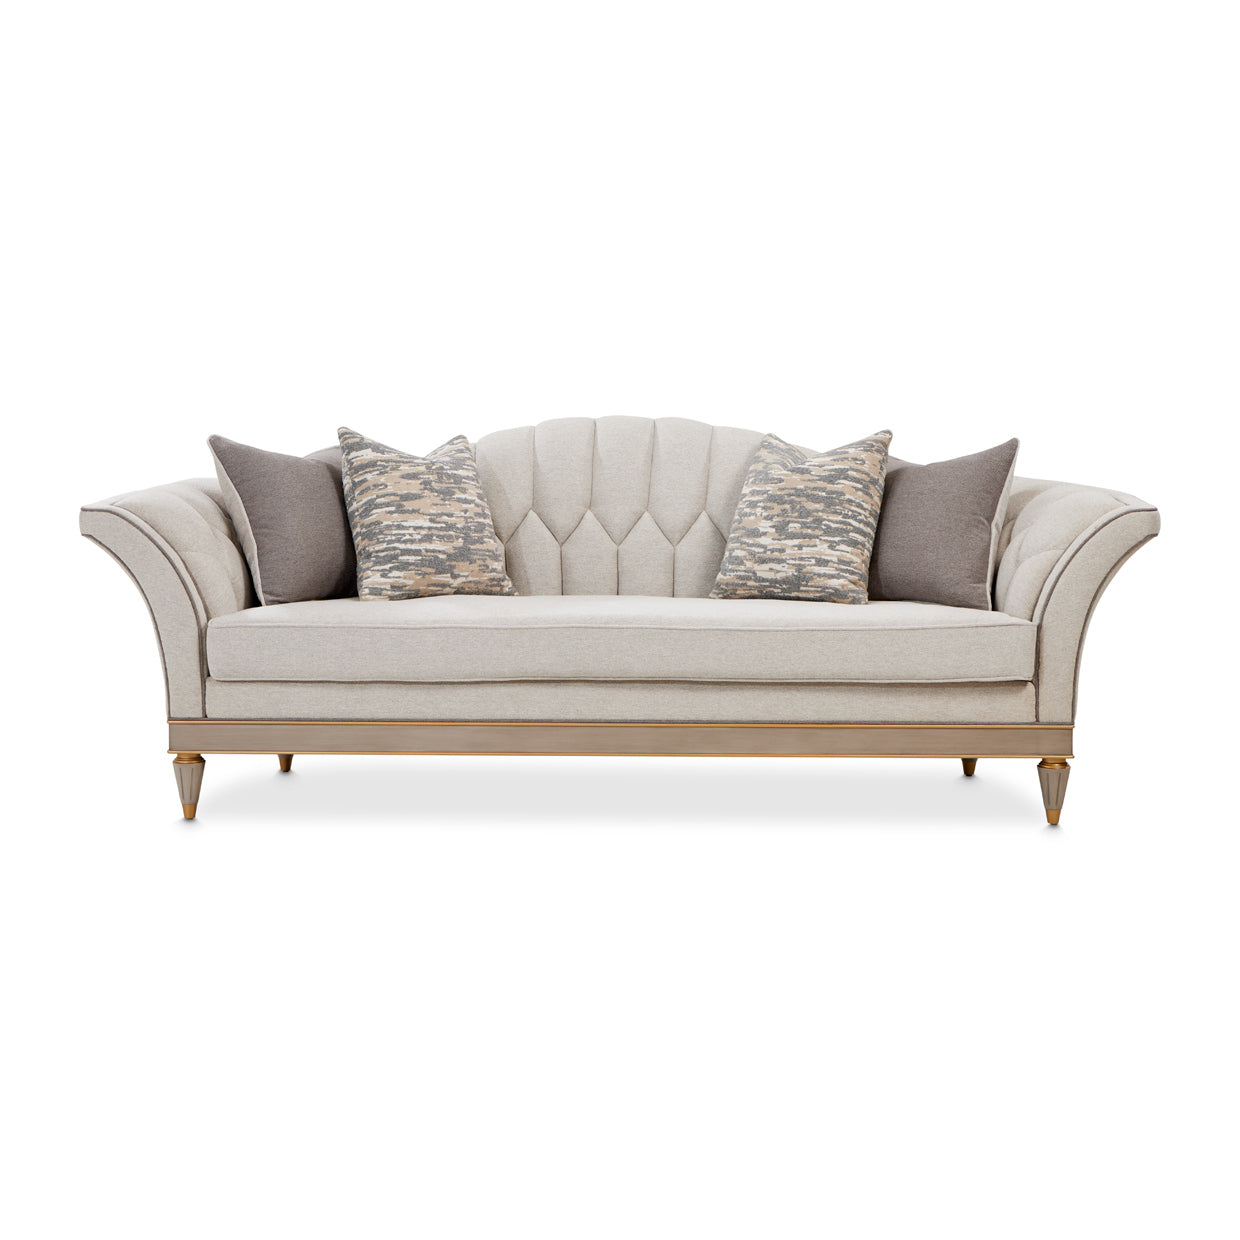 Standard Sofa Furniture,comfort,luxuriously soft touch,pillows,elegance and style